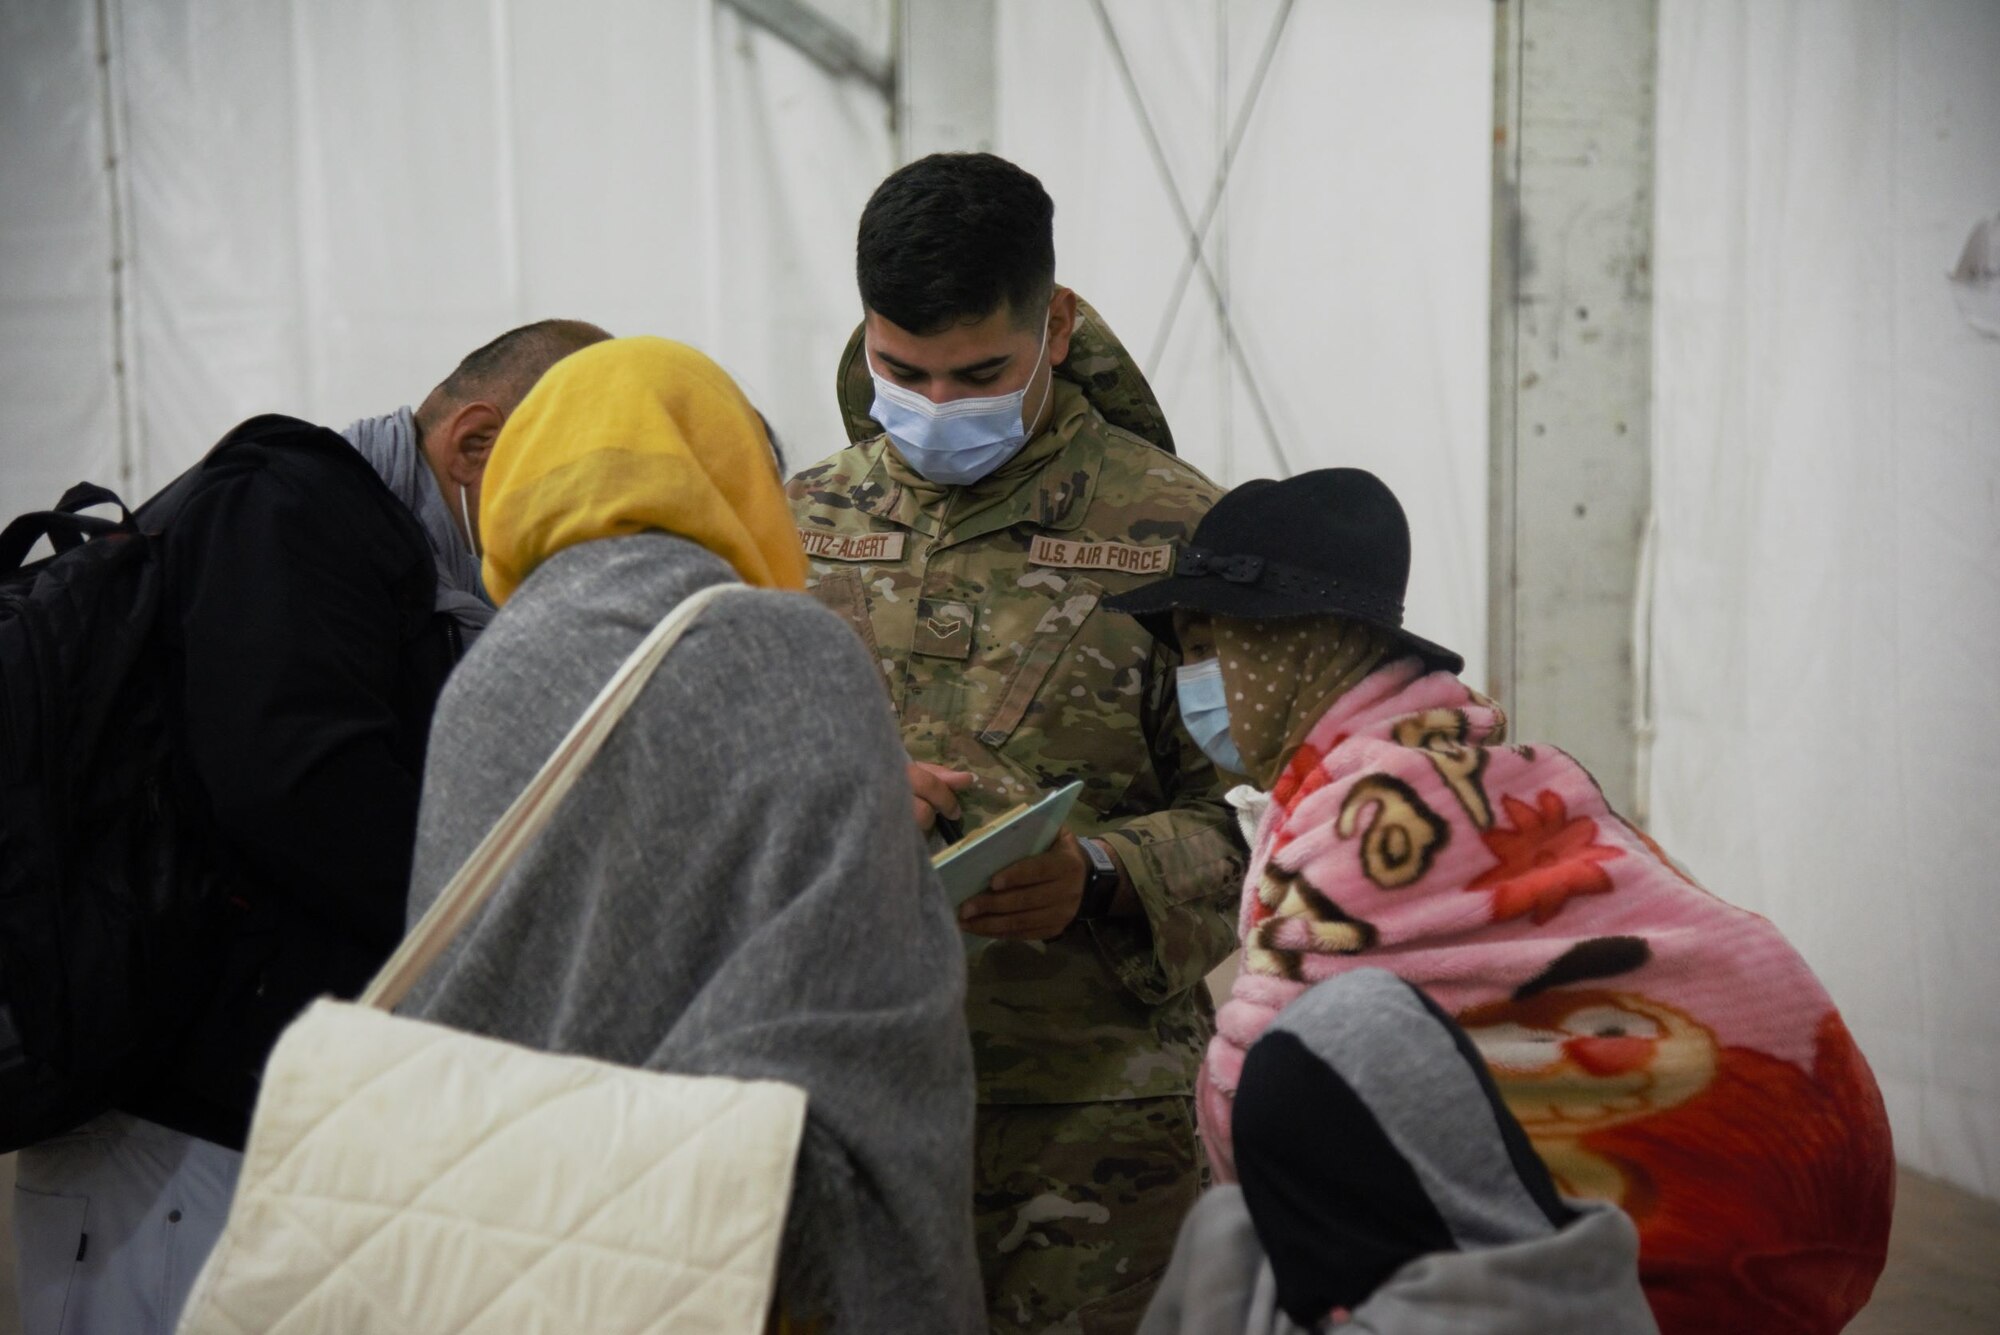 An Airman assigned to Task Force-Holloman assists an Afghan family with final details before they depart Holloman Air Force Base, New Mexico, Sept. 30, 2021. The Department of Defense, through U.S. Northern Command, and in support of the Department of State and Department of Homeland Security, is providing transportation, temporary housing, medical screening, and general support for at least 50,000 Afghan evacuees at suitable facilities, in permanent or temporary structures, as quickly as possible. This initiative provides Afghan evacuees essential support at secure locations outside Afghanistan. (U.S. Navy photo by Mass Communications Specialist 1st Class Sarah Rolin)